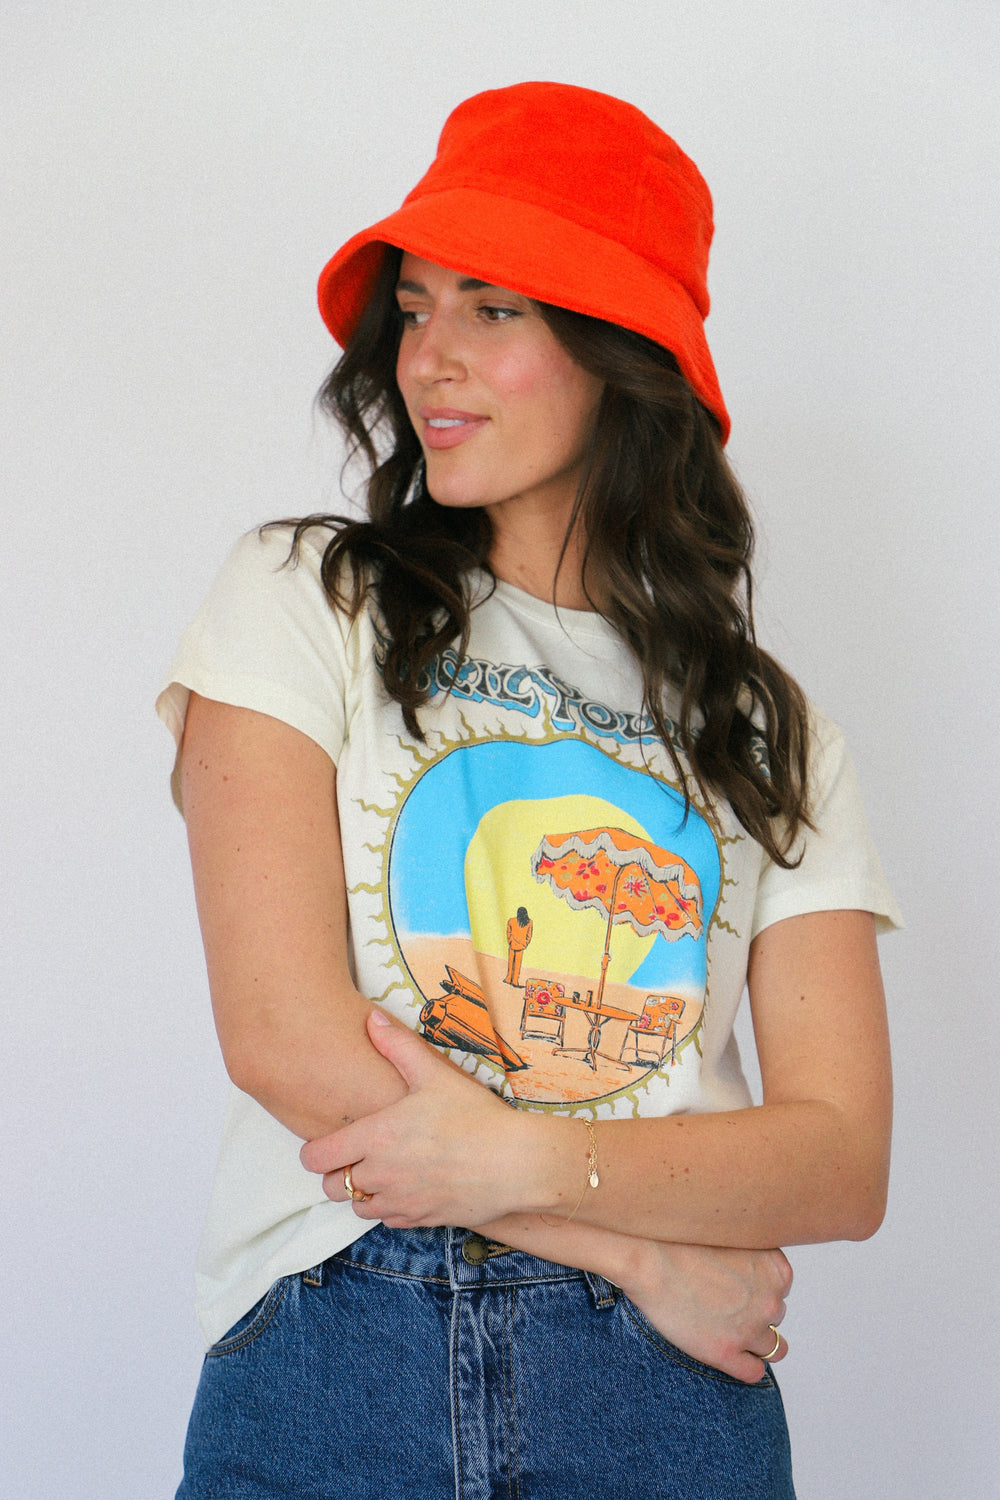 Neil Young On The Beach Tour Tee